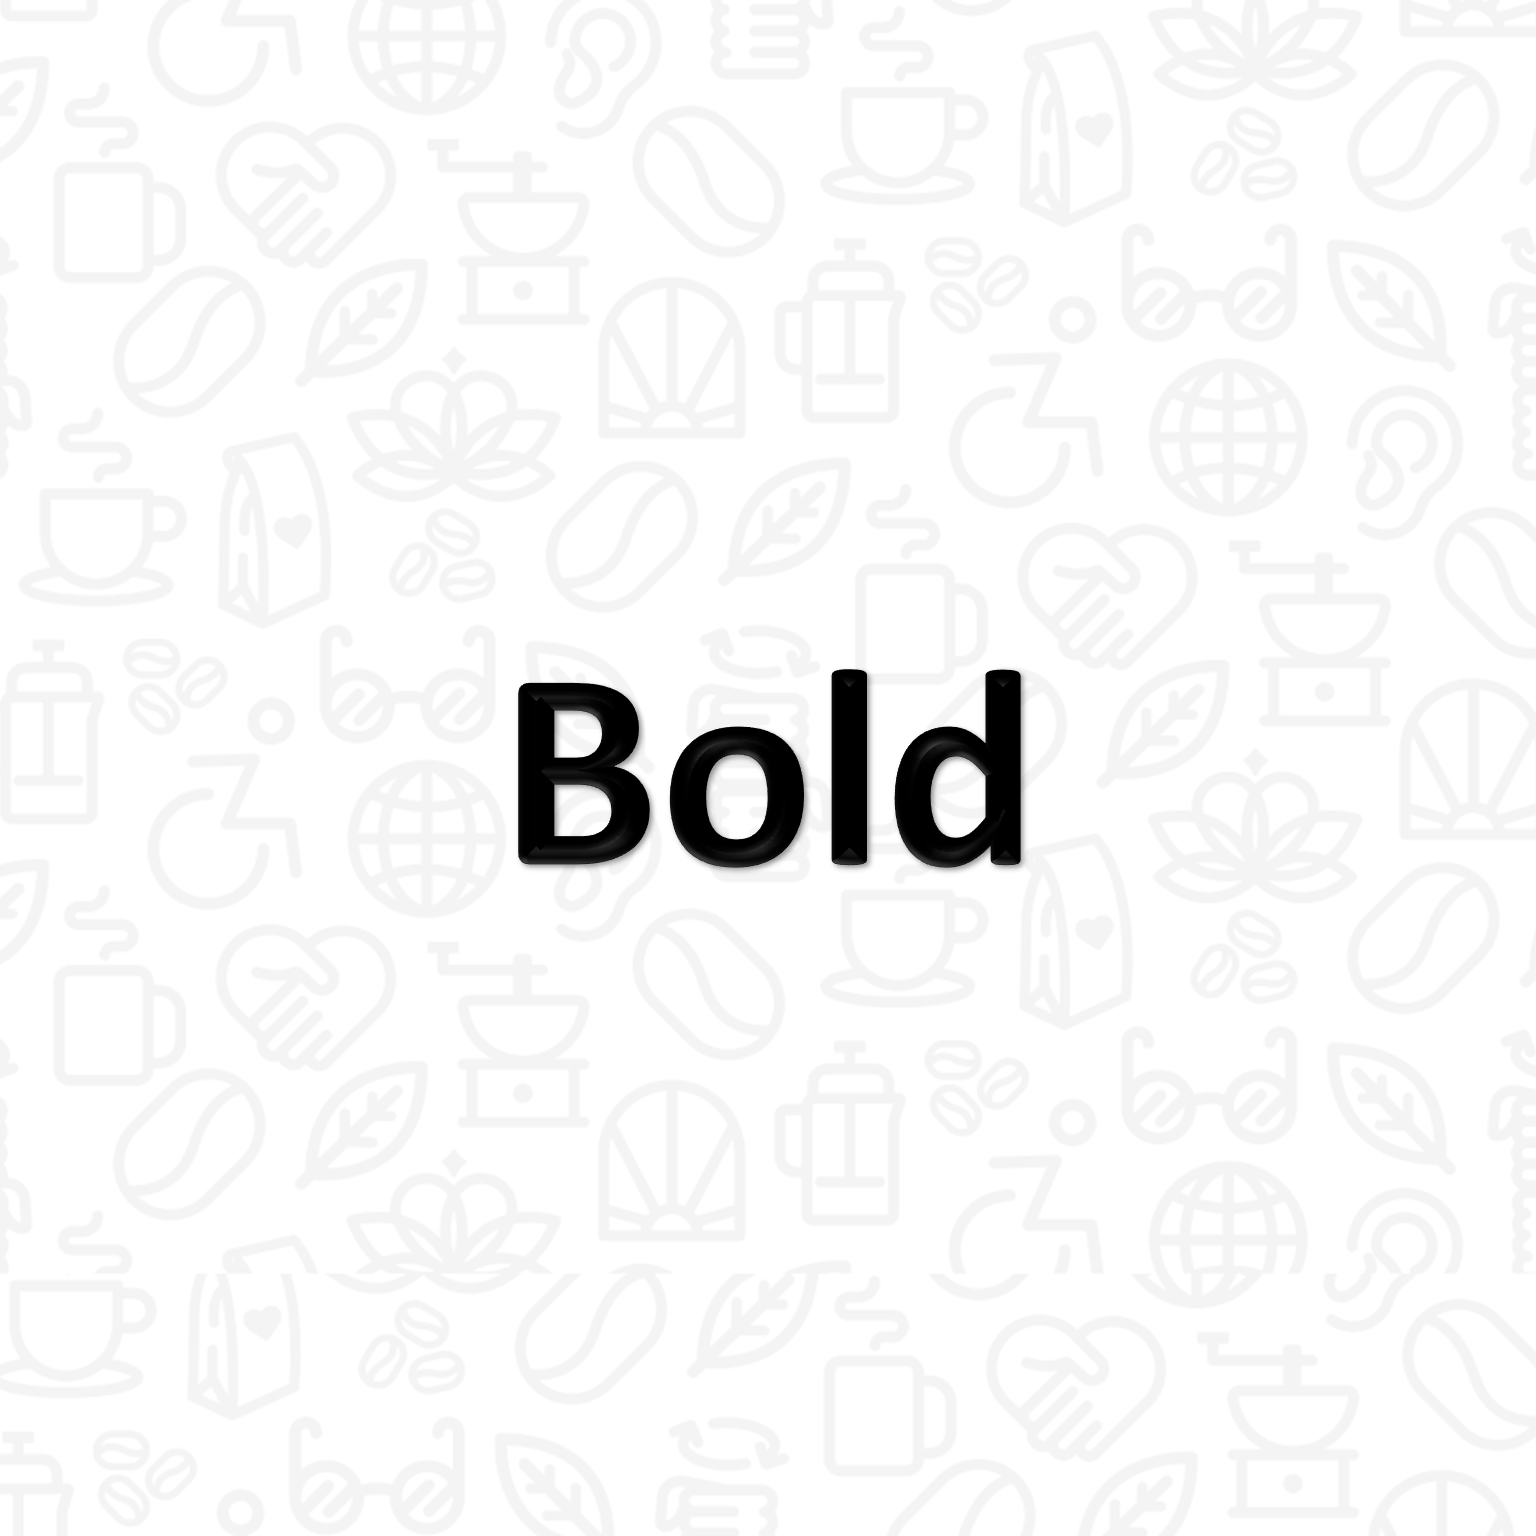 The word "Bold" on a background covered with coffee and disability icons in line art